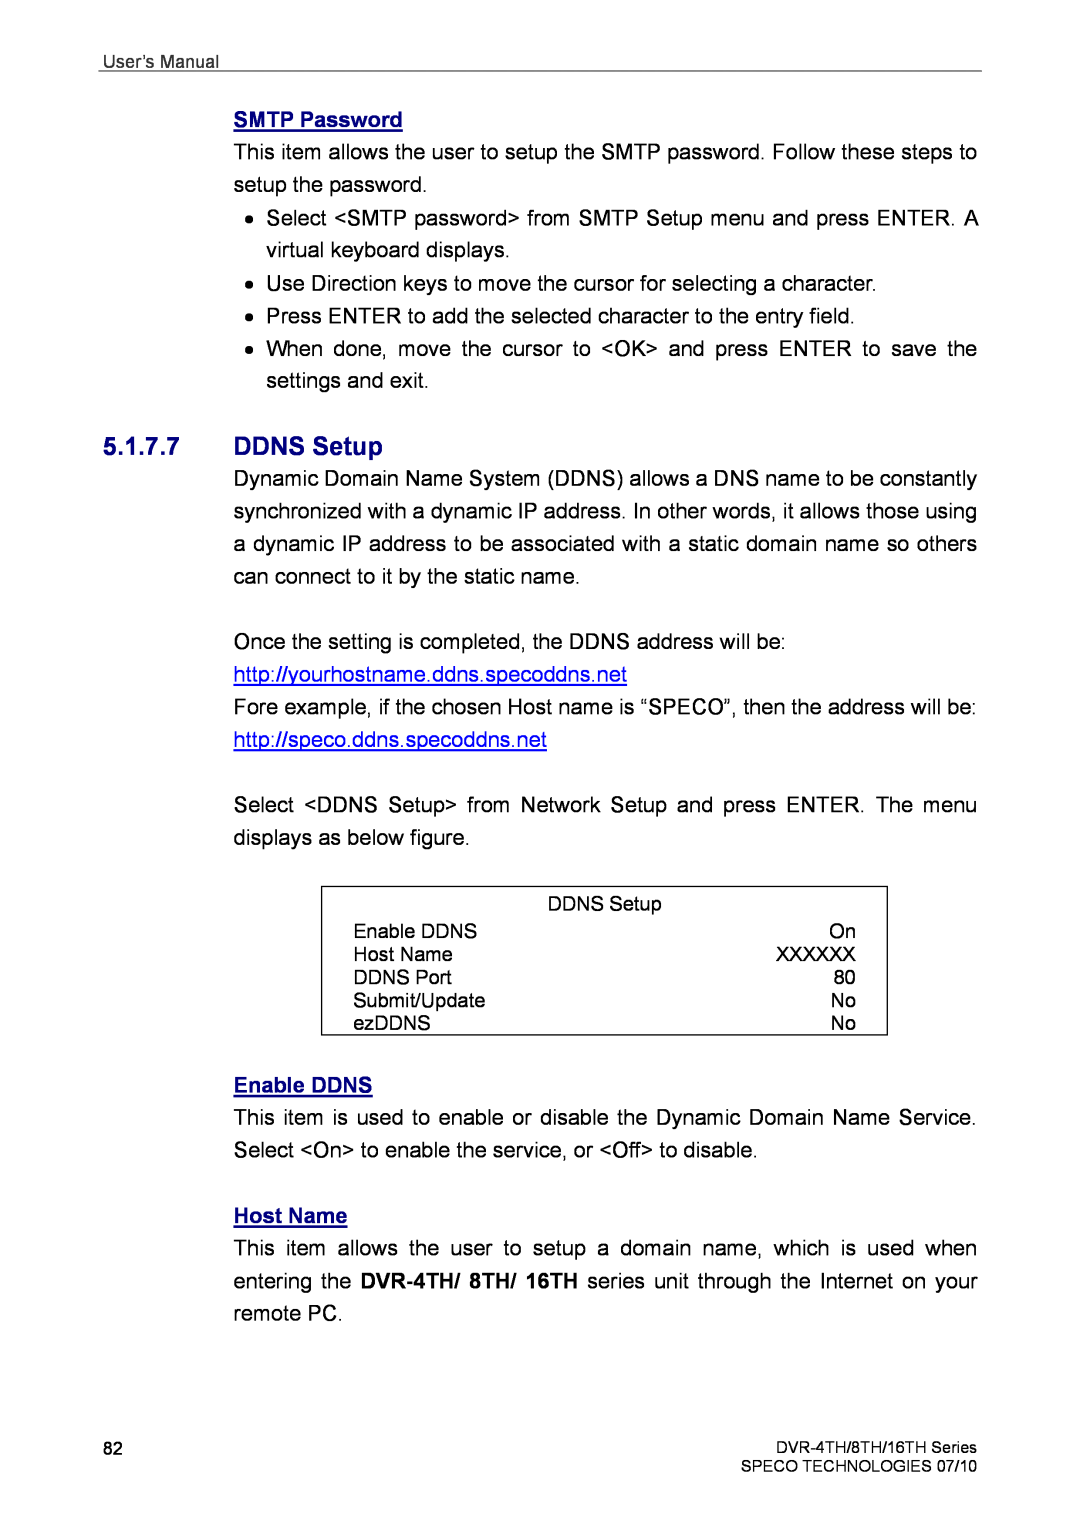 Speco Technologies 16TH, 8TH, 4TH user manual DDNS Setup, SMTP Password, Enable DDNS, Host Name 